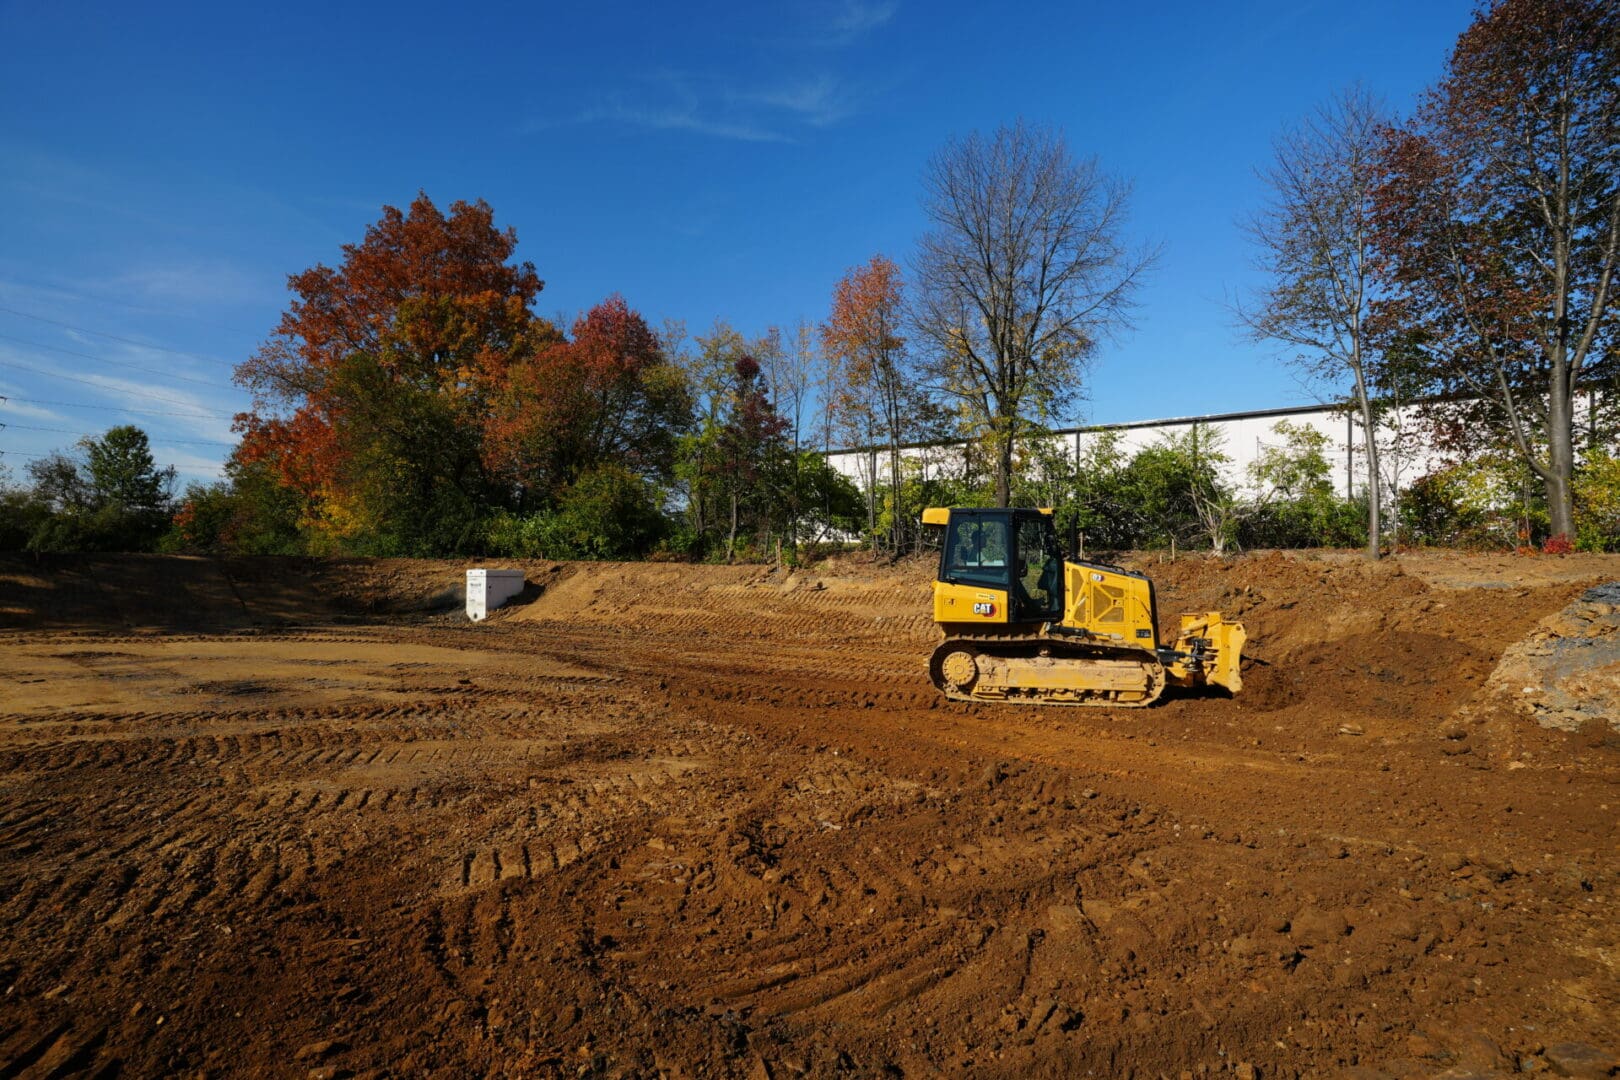 A bulldozer performing site work on a dirt field.